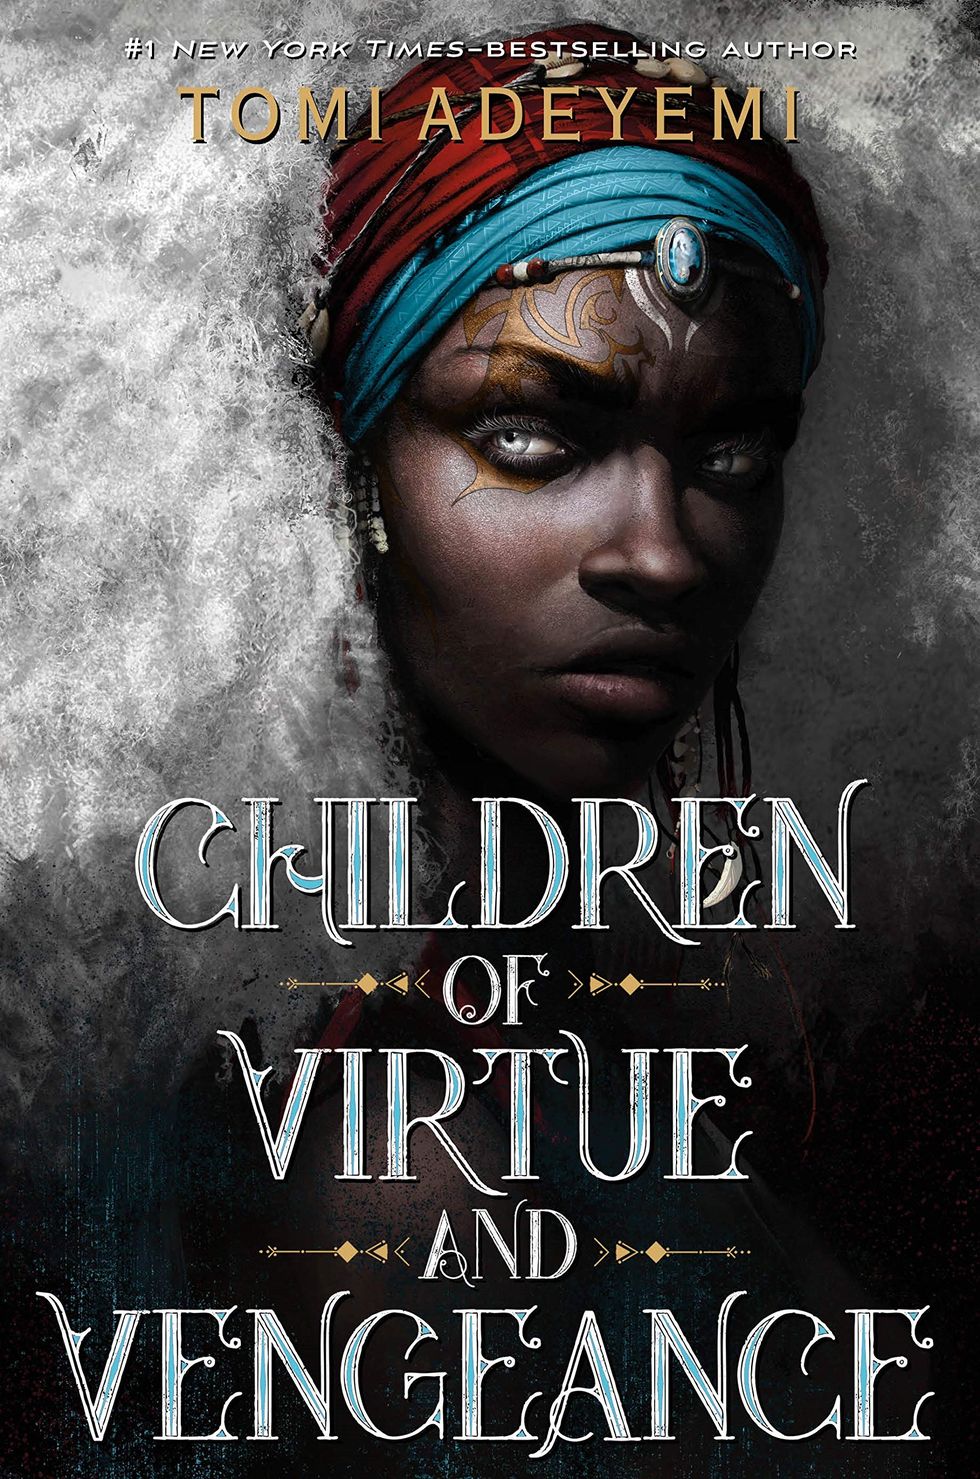 "Children of Virtue and Vengeance" by Tomi Adeyemi - Best YA Books of 2019